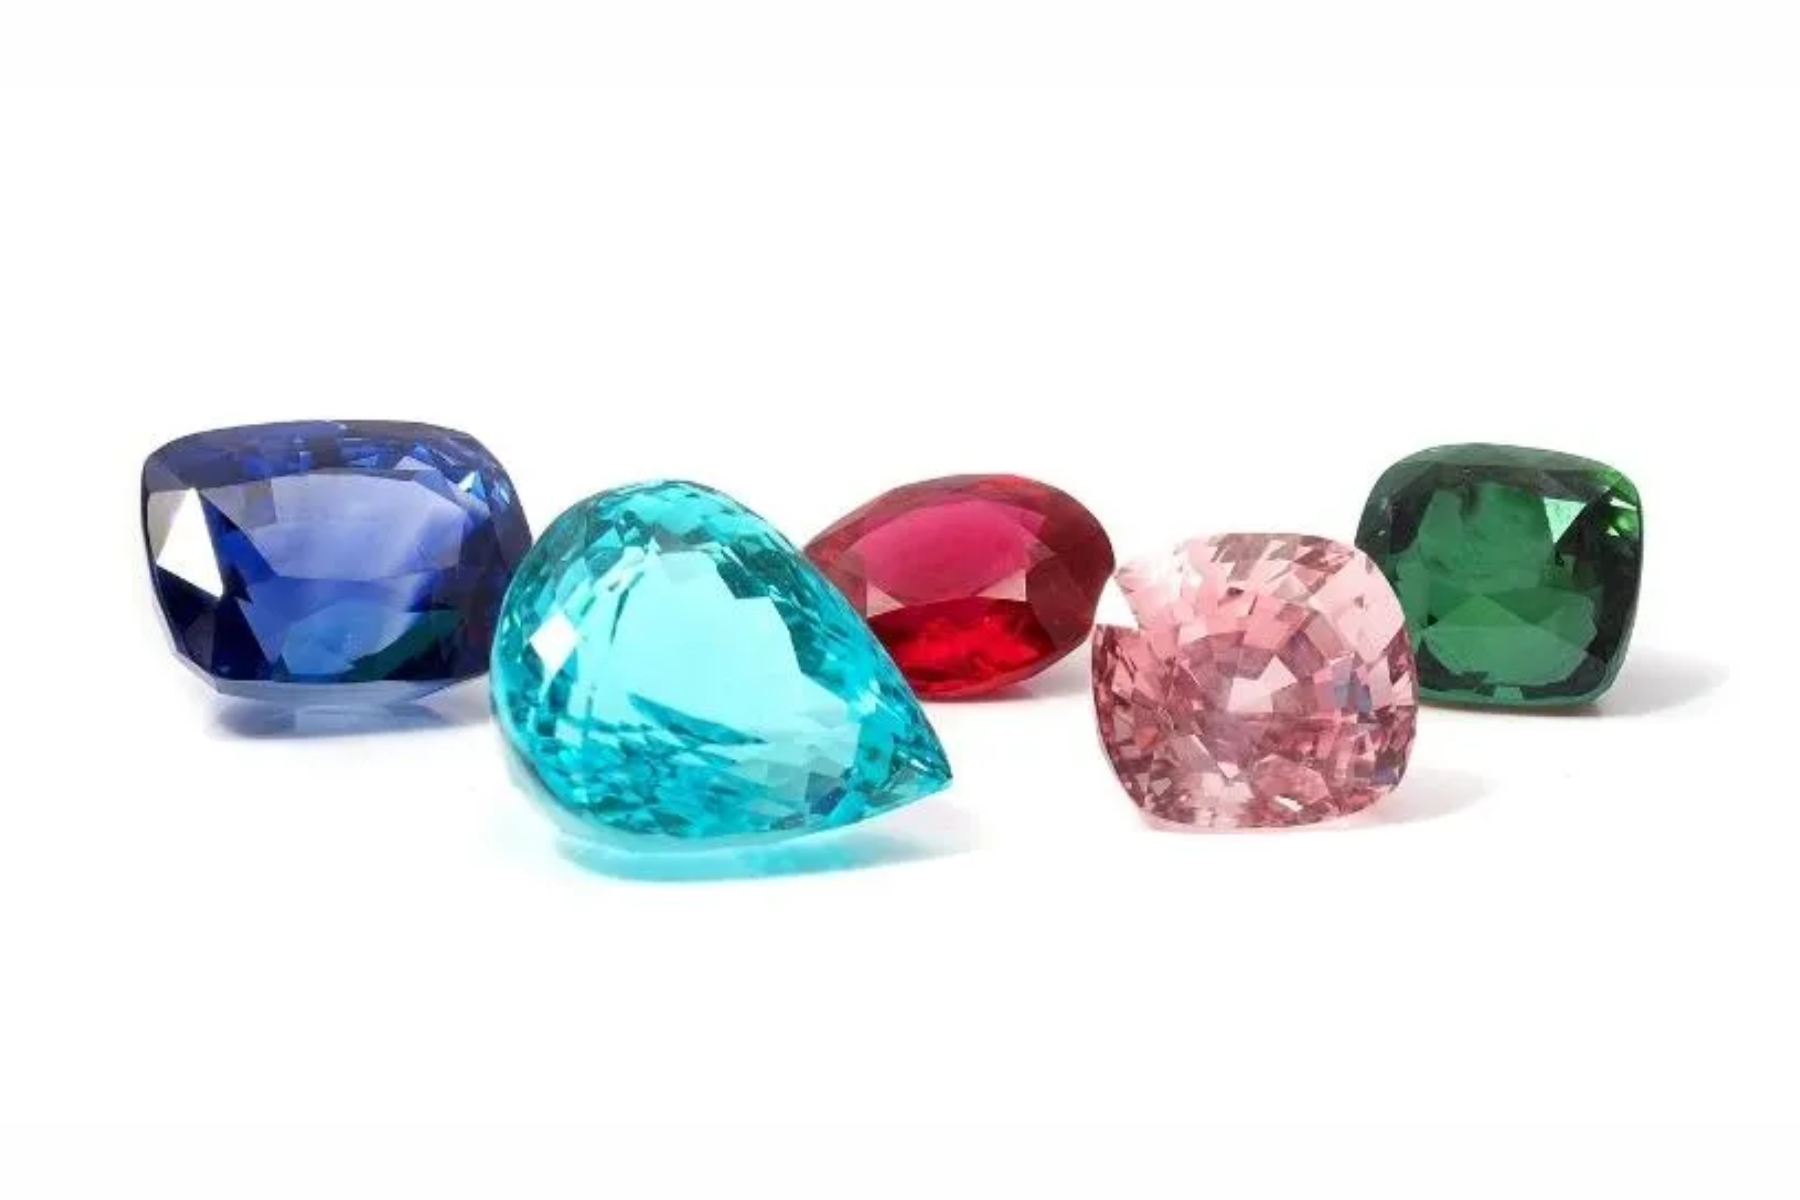 Five different types, shapes, colors of birthstones